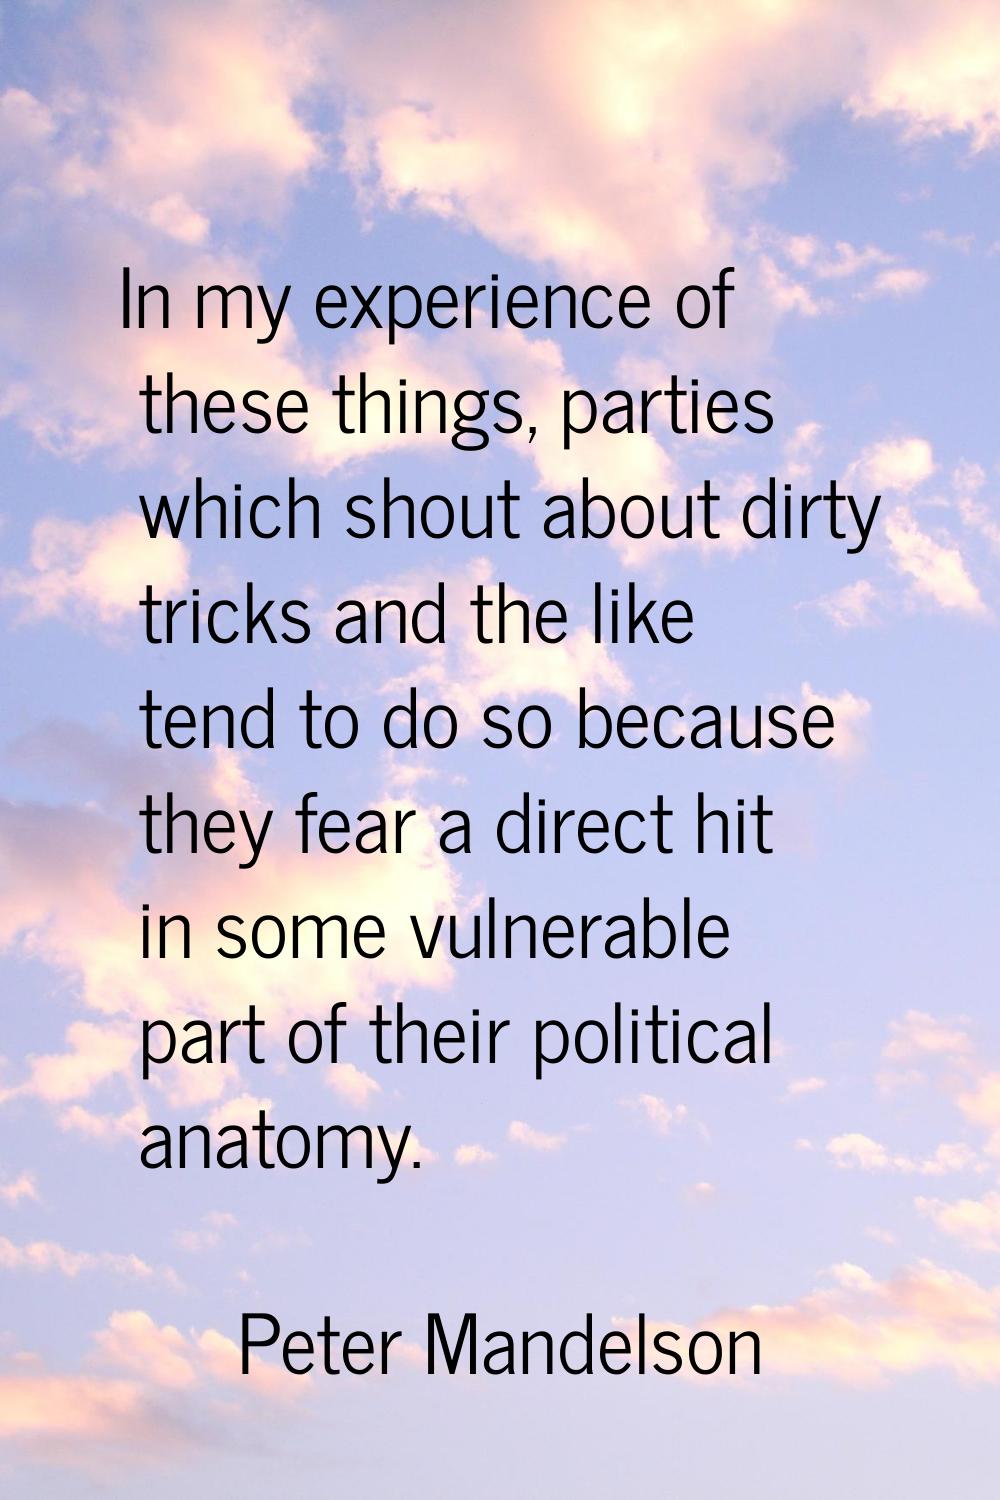 In my experience of these things, parties which shout about dirty tricks and the like tend to do so